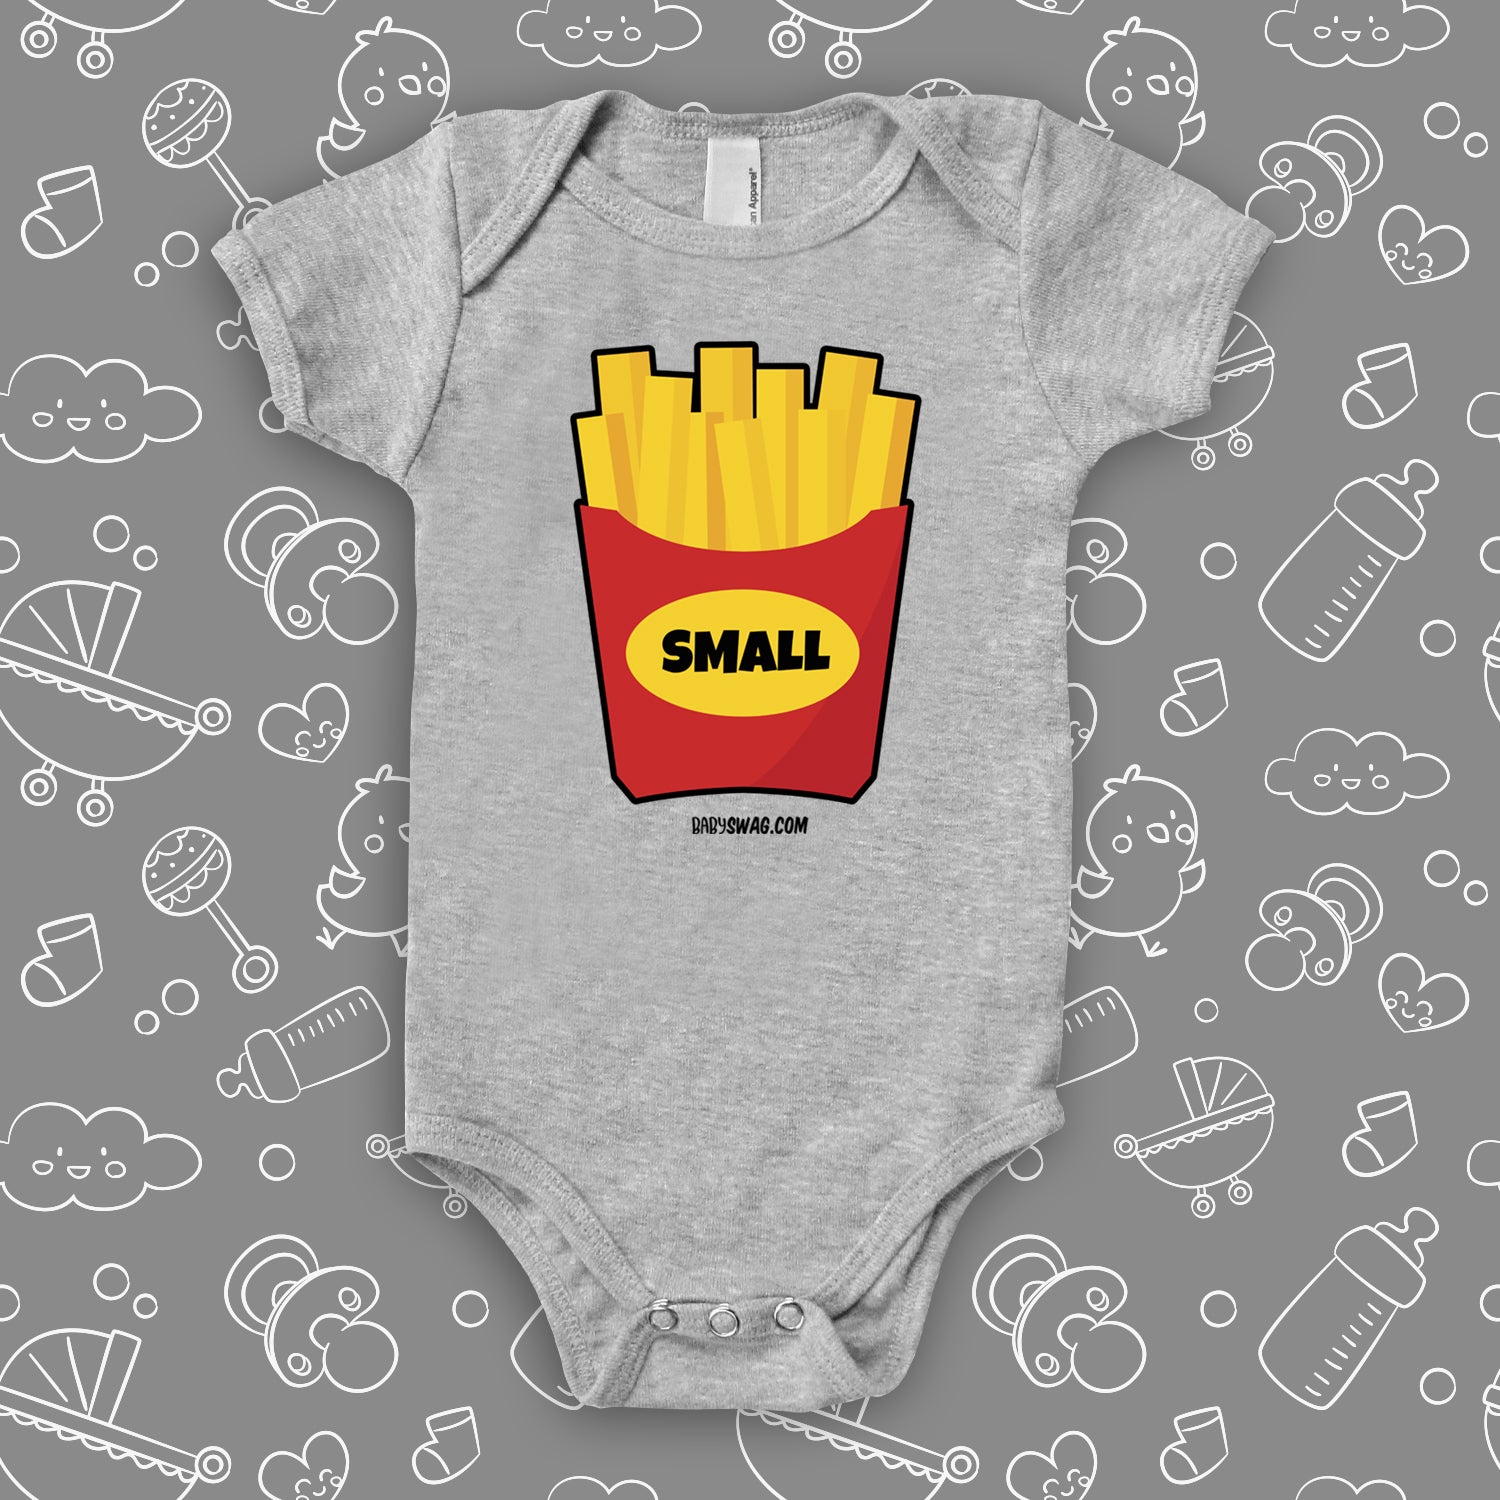 The ''Small Fry'' graphic baby onesie in gray